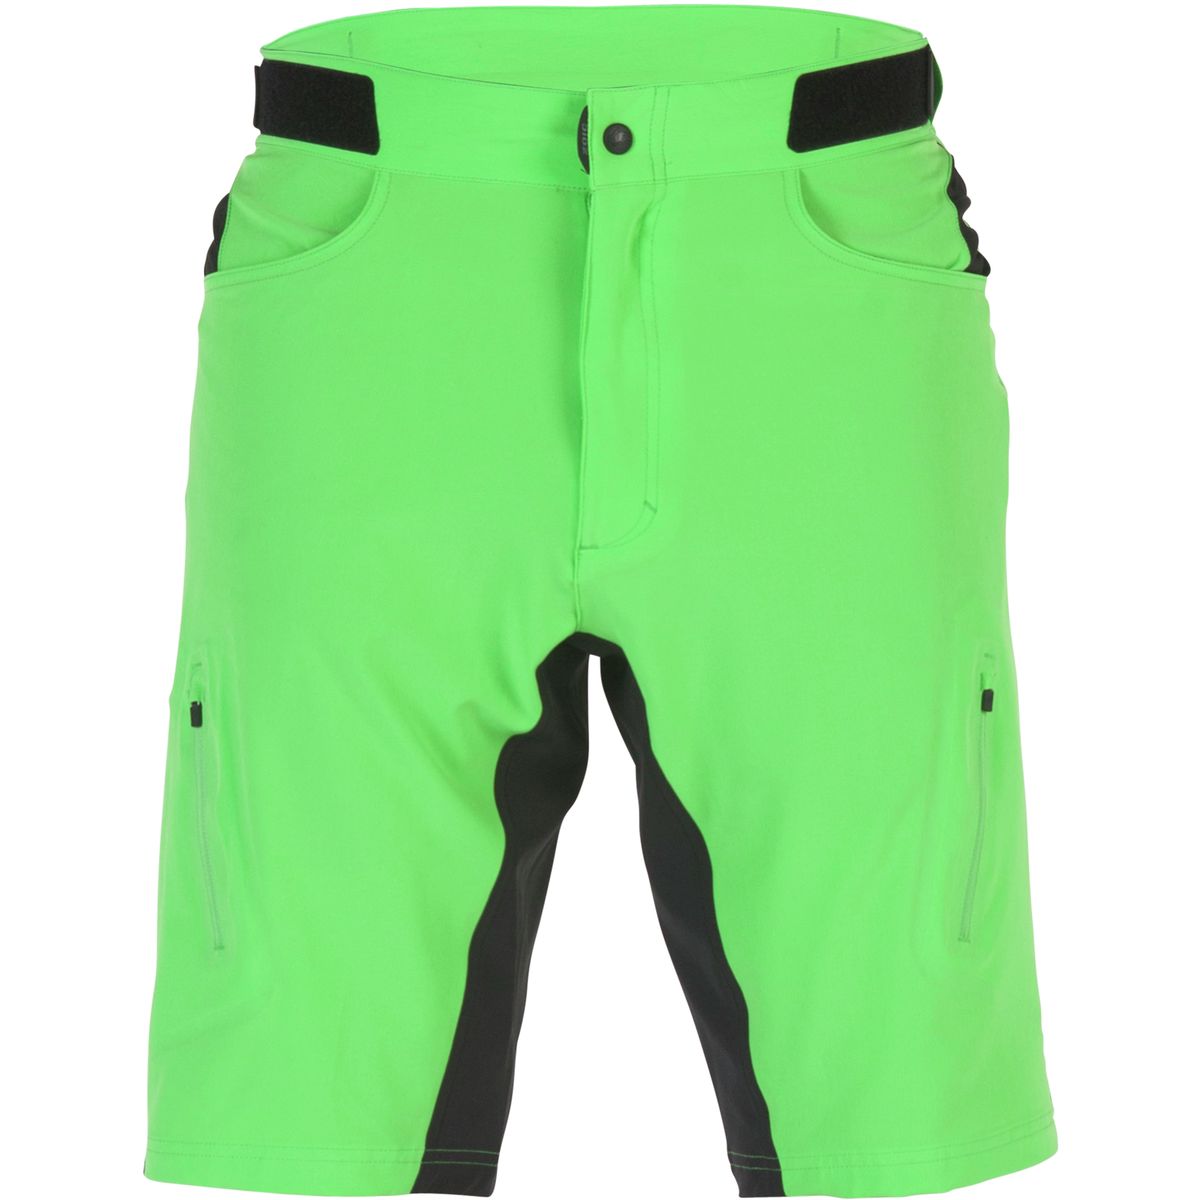 ZOIC Ether One Short + Essential Liner - Men's